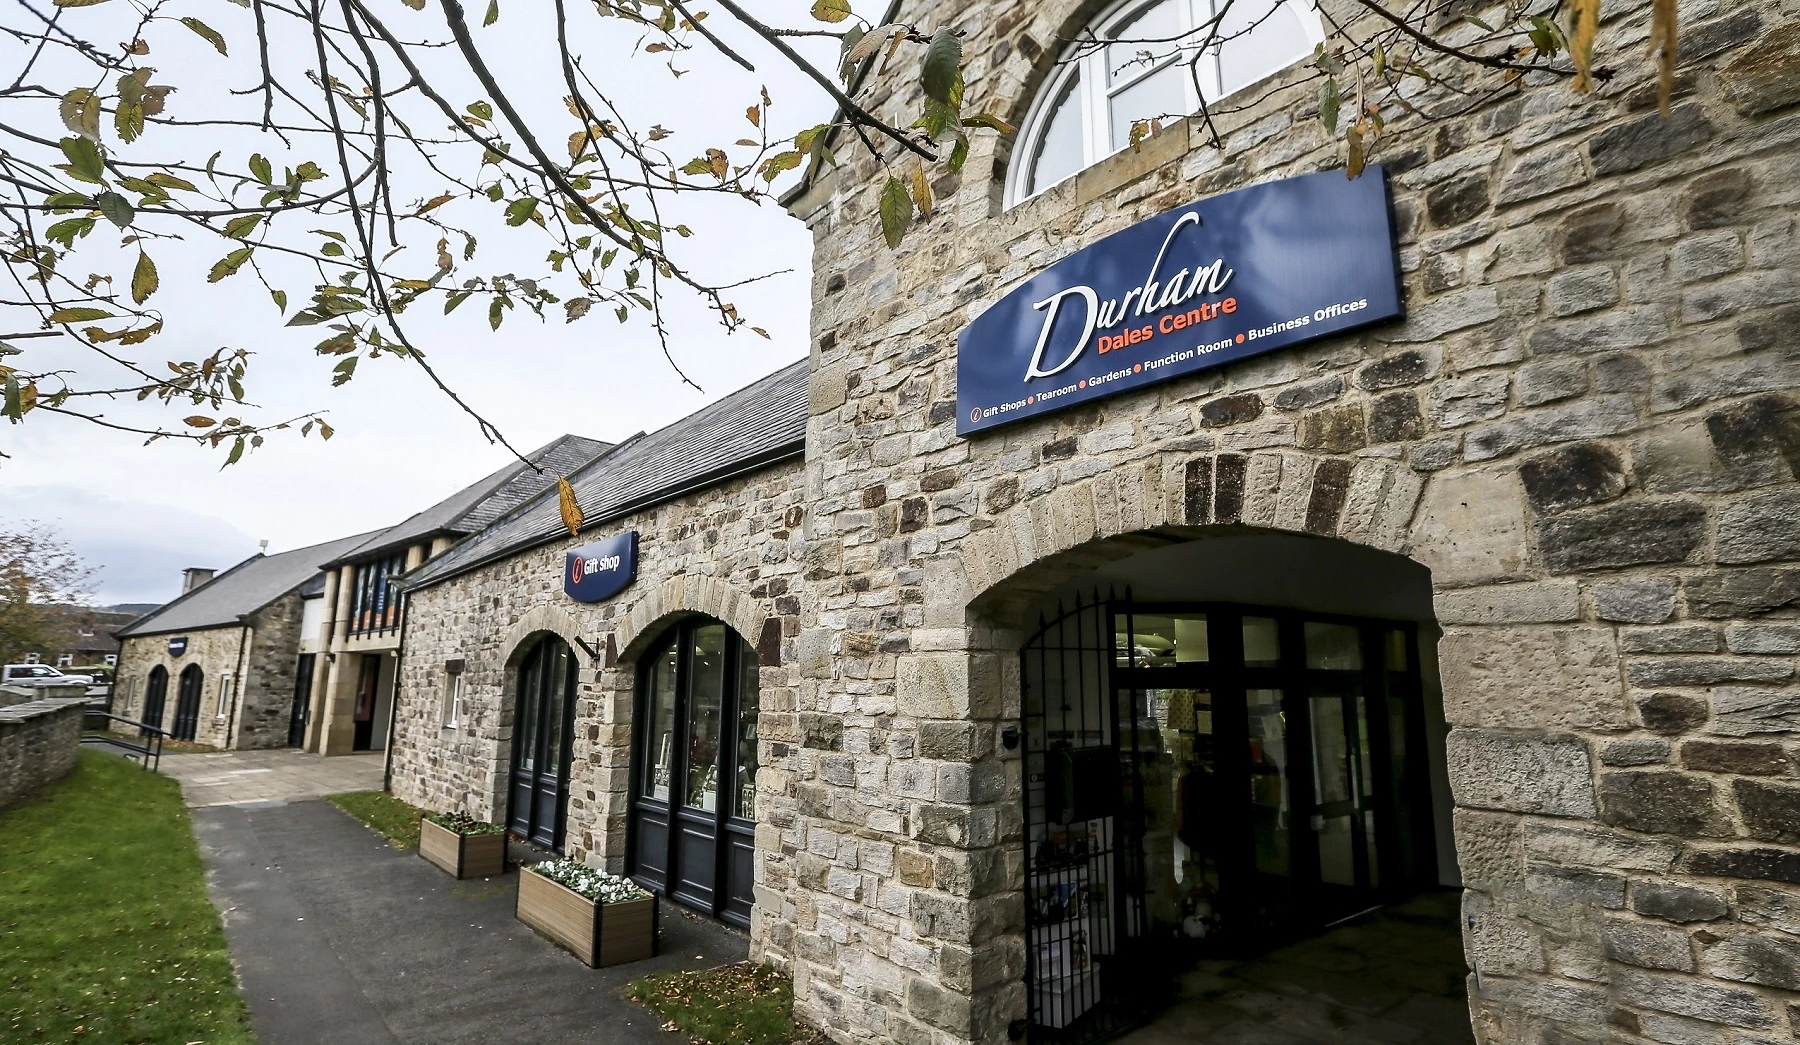 Natural skincare business Organic and Botanic is based at the Durham Dales Centre in Stanhope, Bishop Auckland.